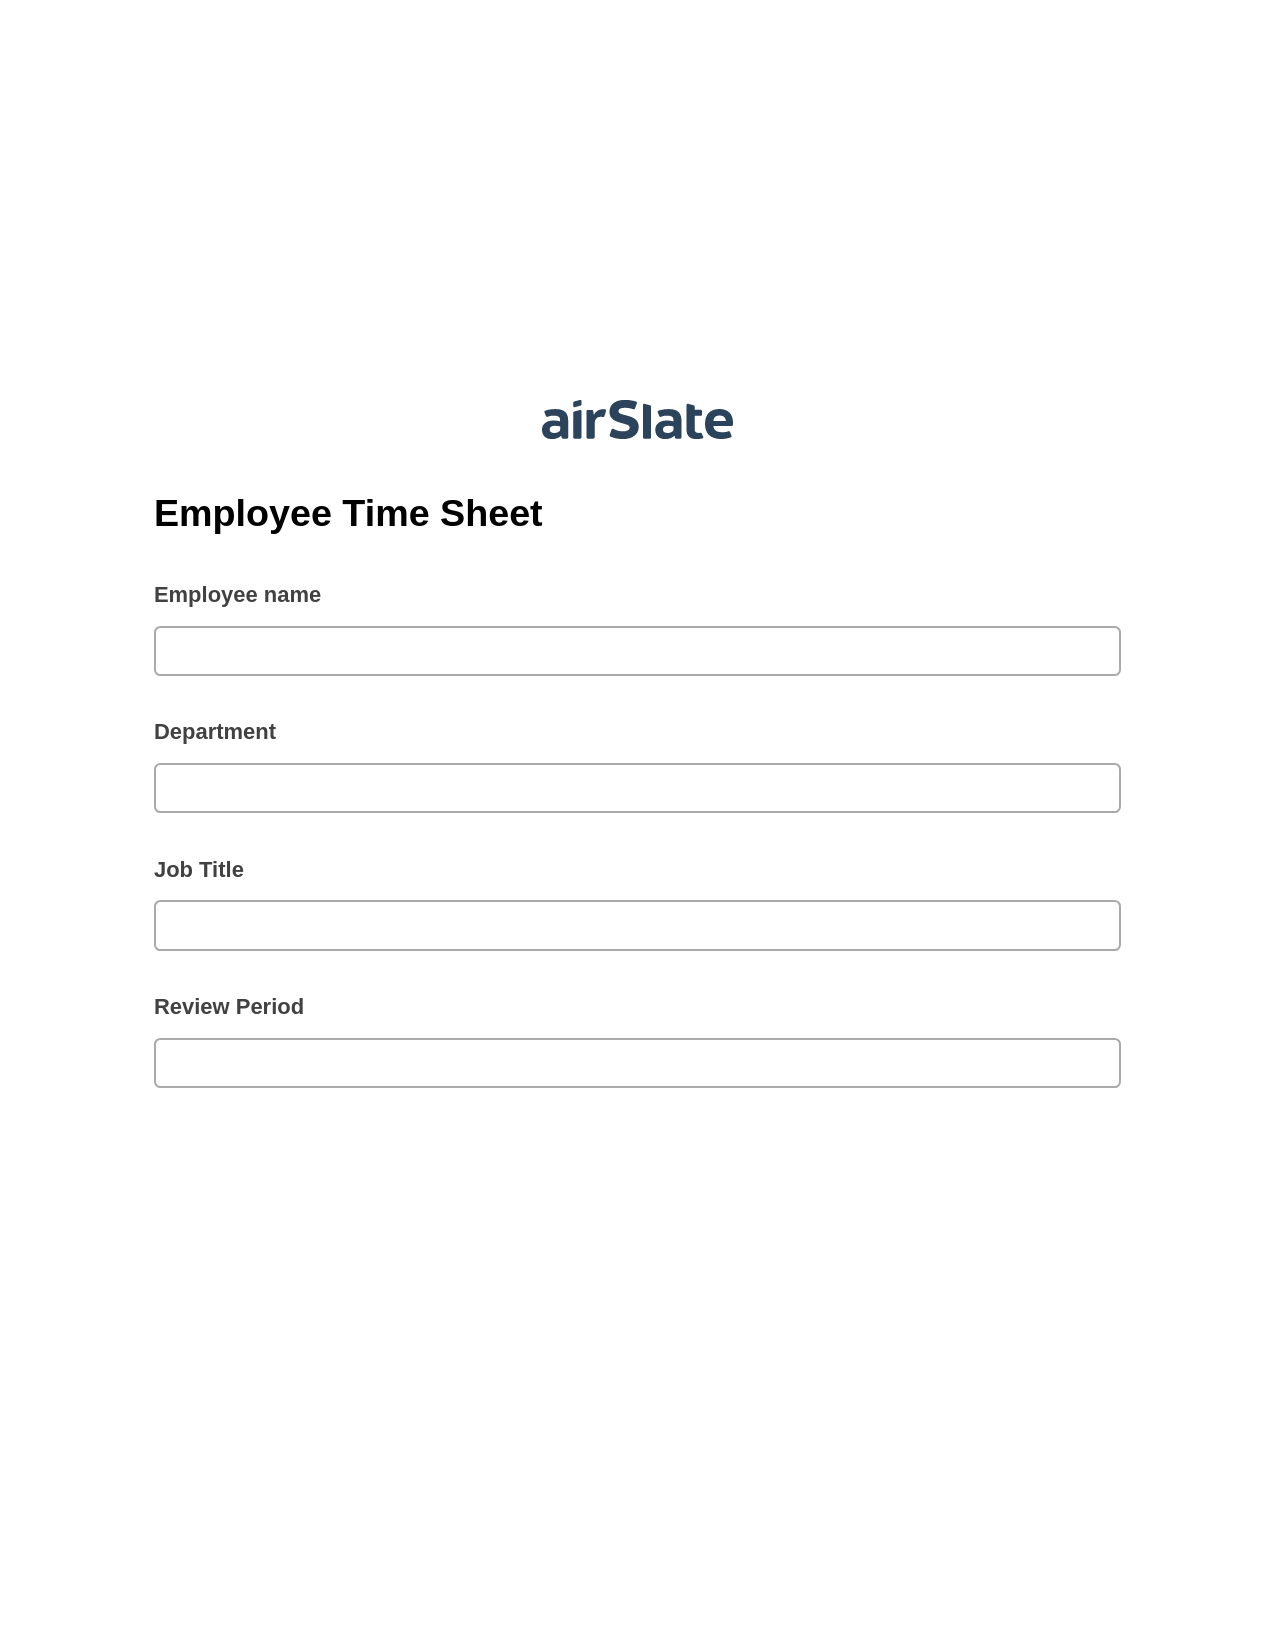 Employee Time Sheet System Bot - Slack Two-Way Binding Bot, Assign Roles to Recipients Bot, Archive to Dropbox Bot